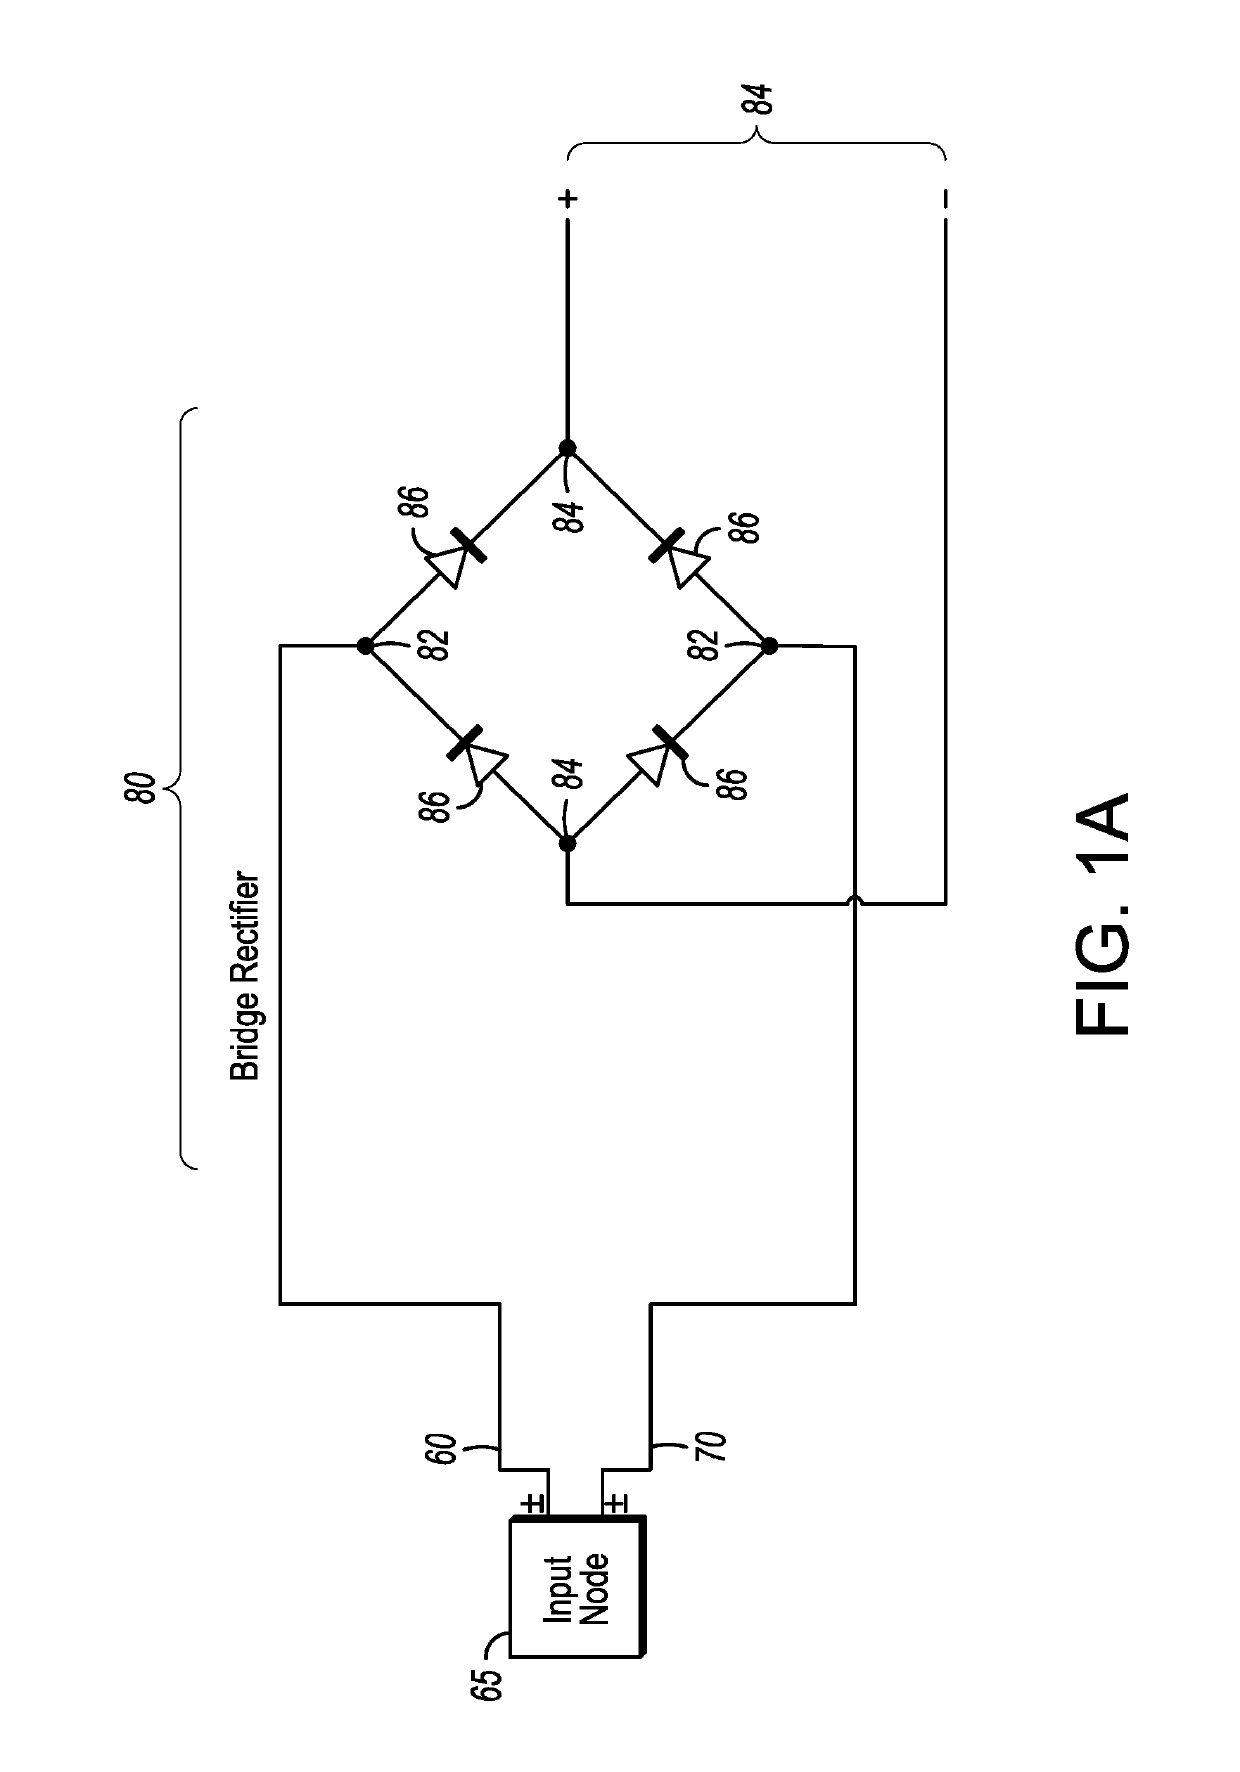 Universal ac and DC input modular interconnectable printed circuit board for power distribution management to light emitting diodes